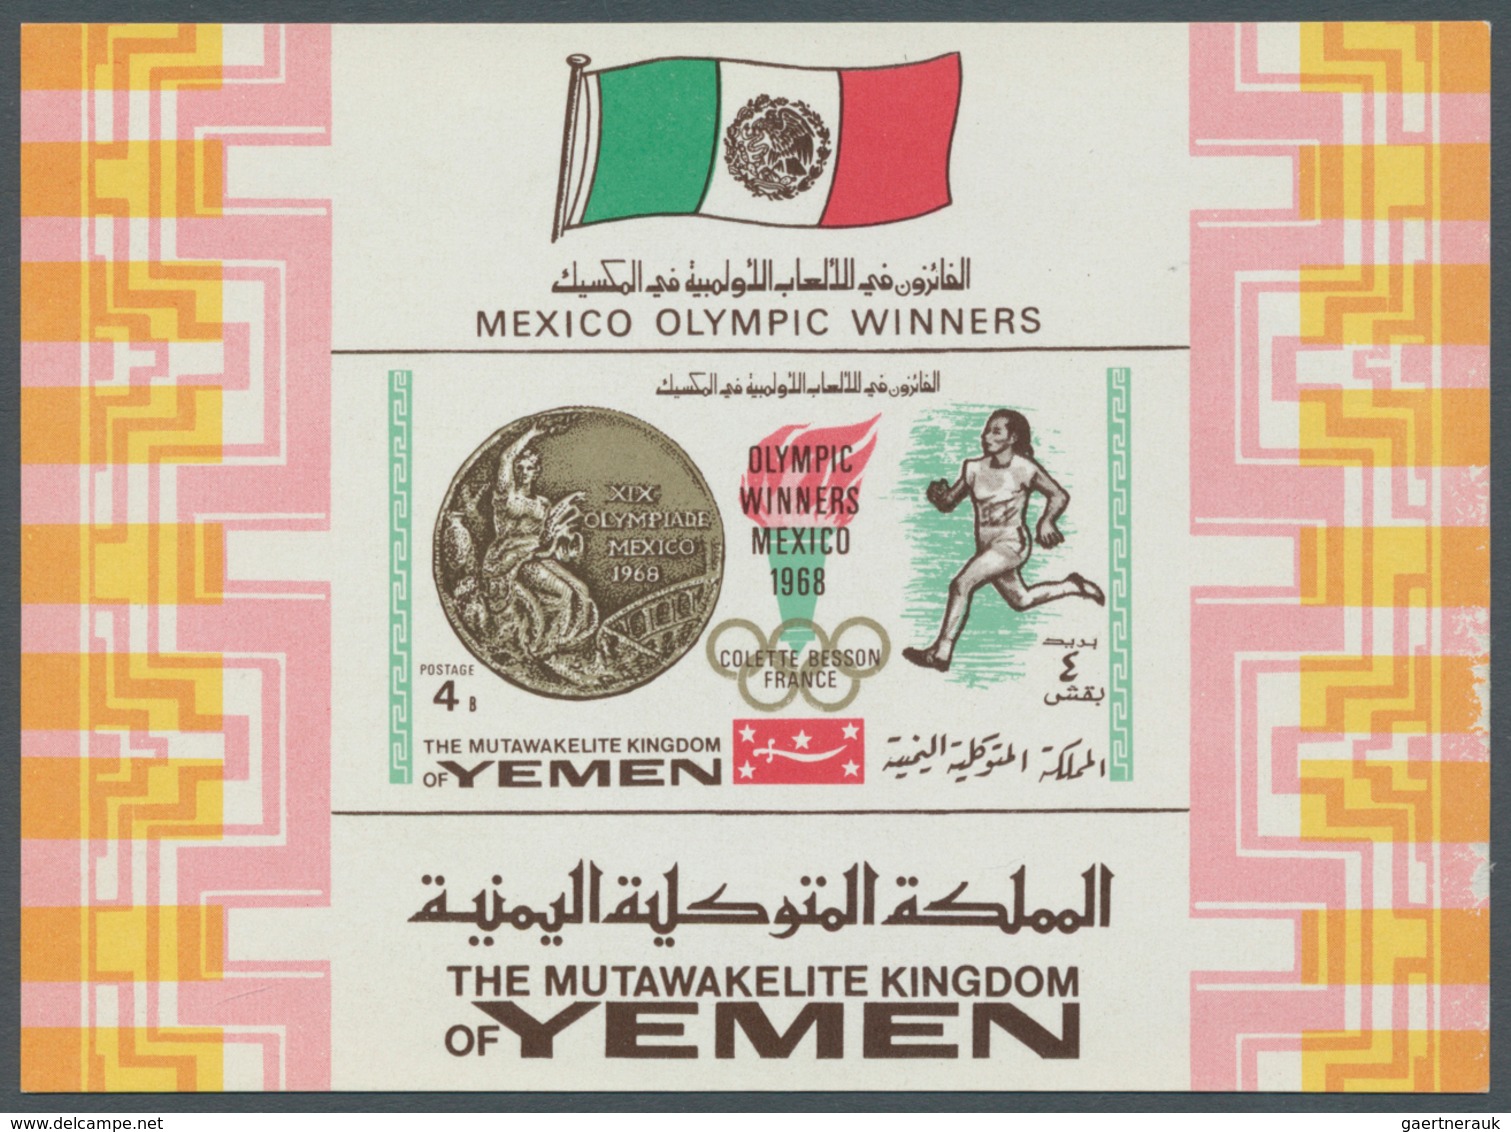 25297 Thematik: Olympische Spiele / olympic games: 1968, Yemen Kingdom, Gold Medal Winners, imperf. souven